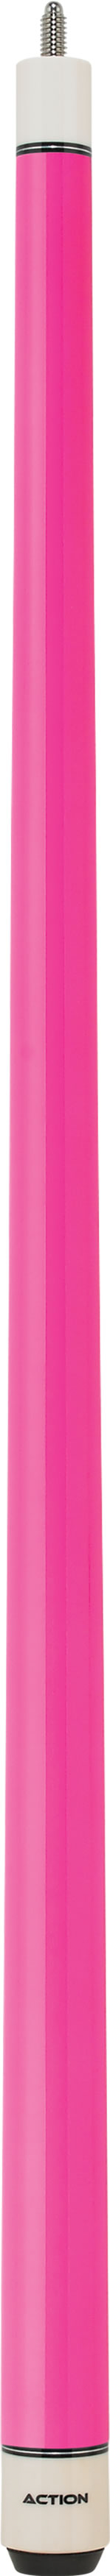 Action Starter COL06 Pink Cue Pool Cue